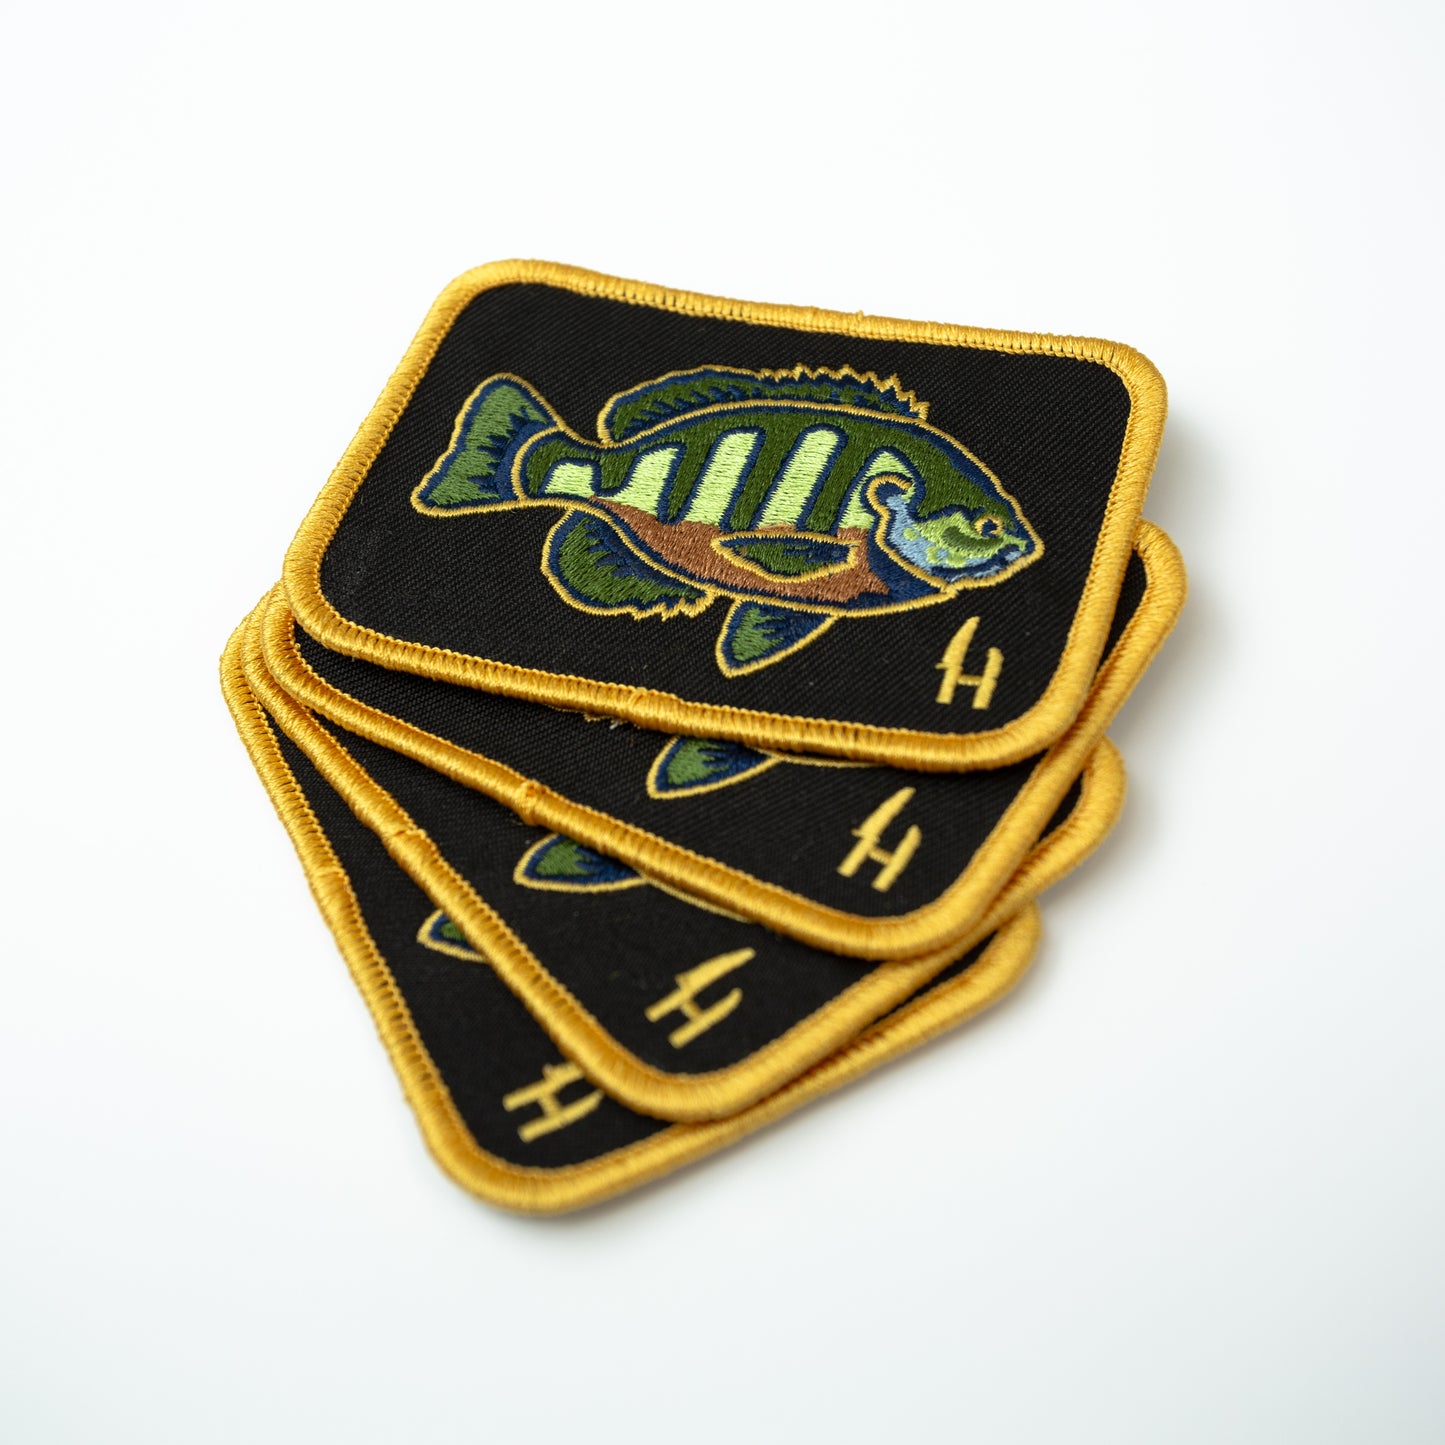 Black and Gold Bluegill Patch